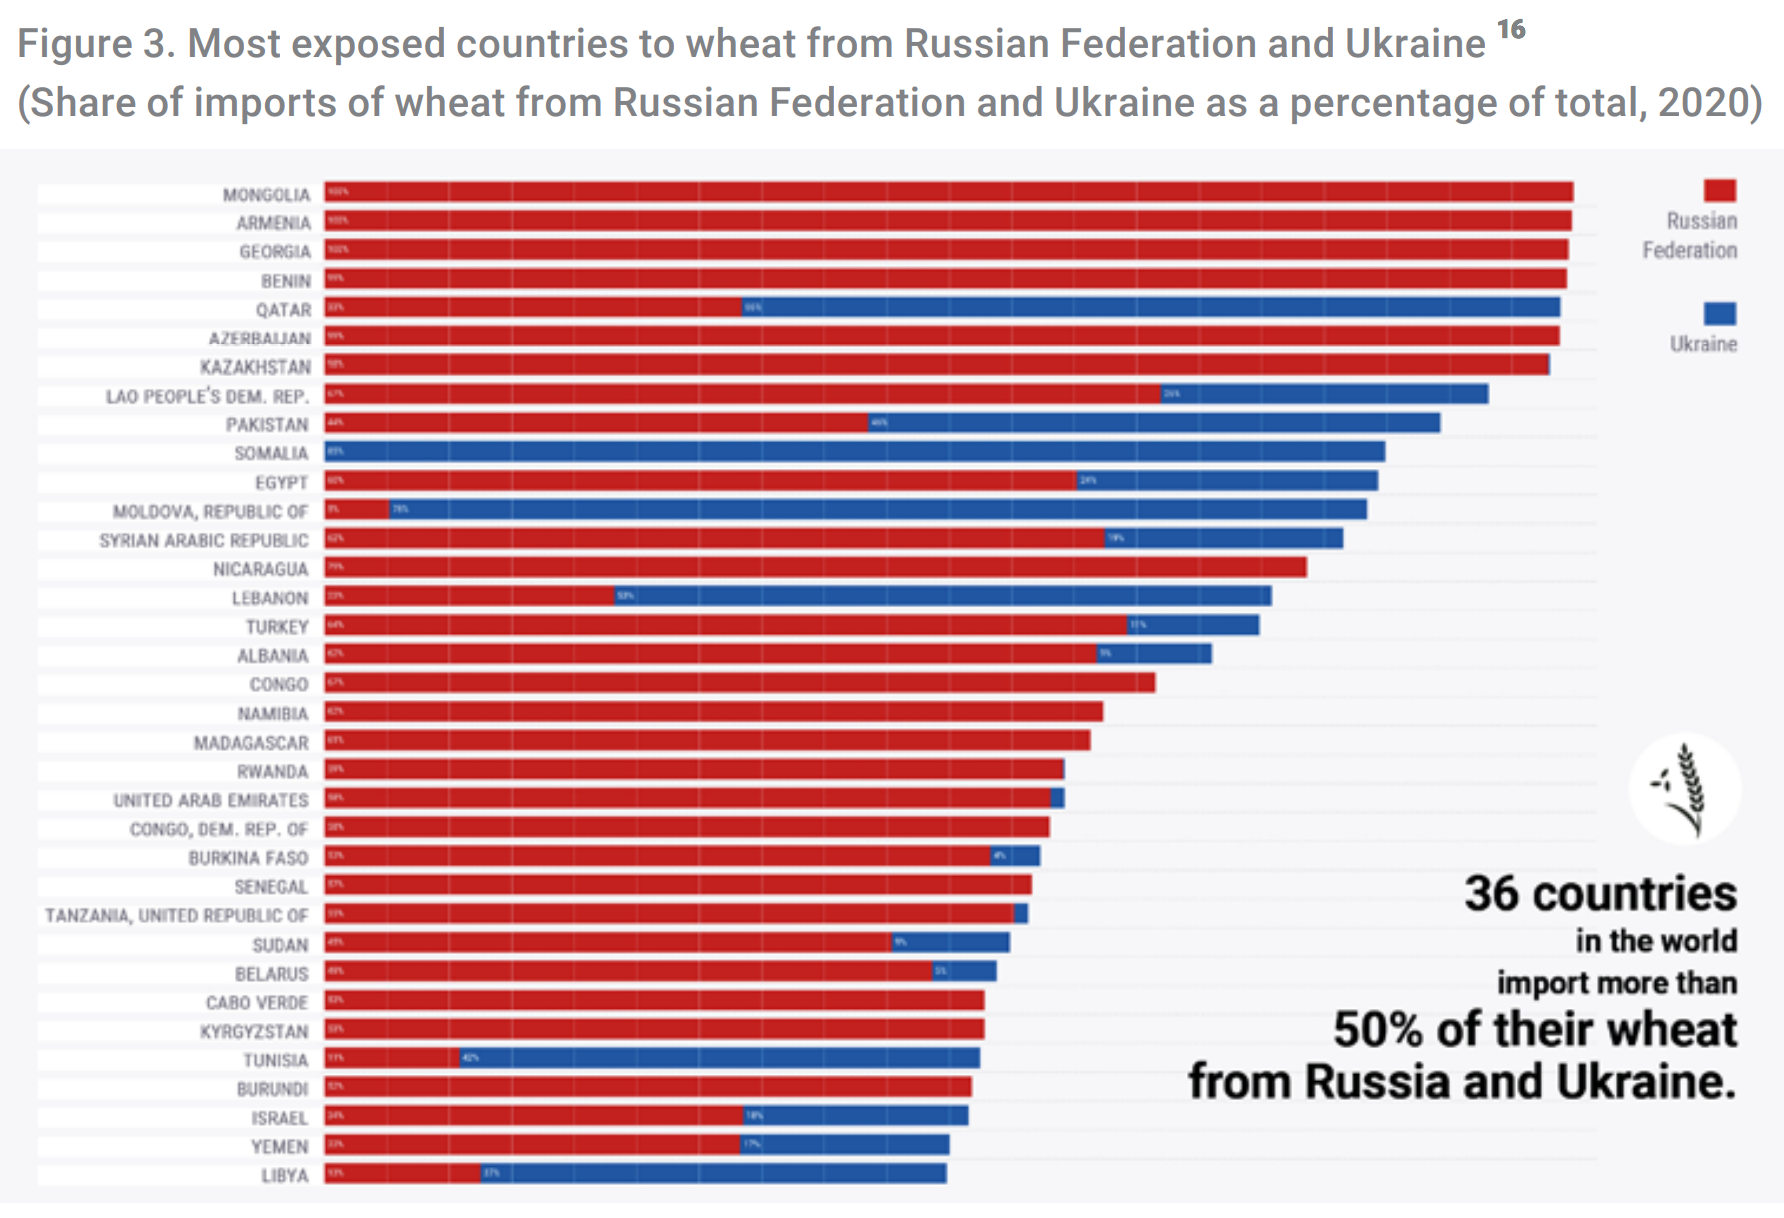 Most exposed countries to wheat from Russian Federation and Ukraine in April 2022. Share of imports of wheat from Russian Federation and Ukraine as a percentage of total, 2020. Graphic: UNCTAD